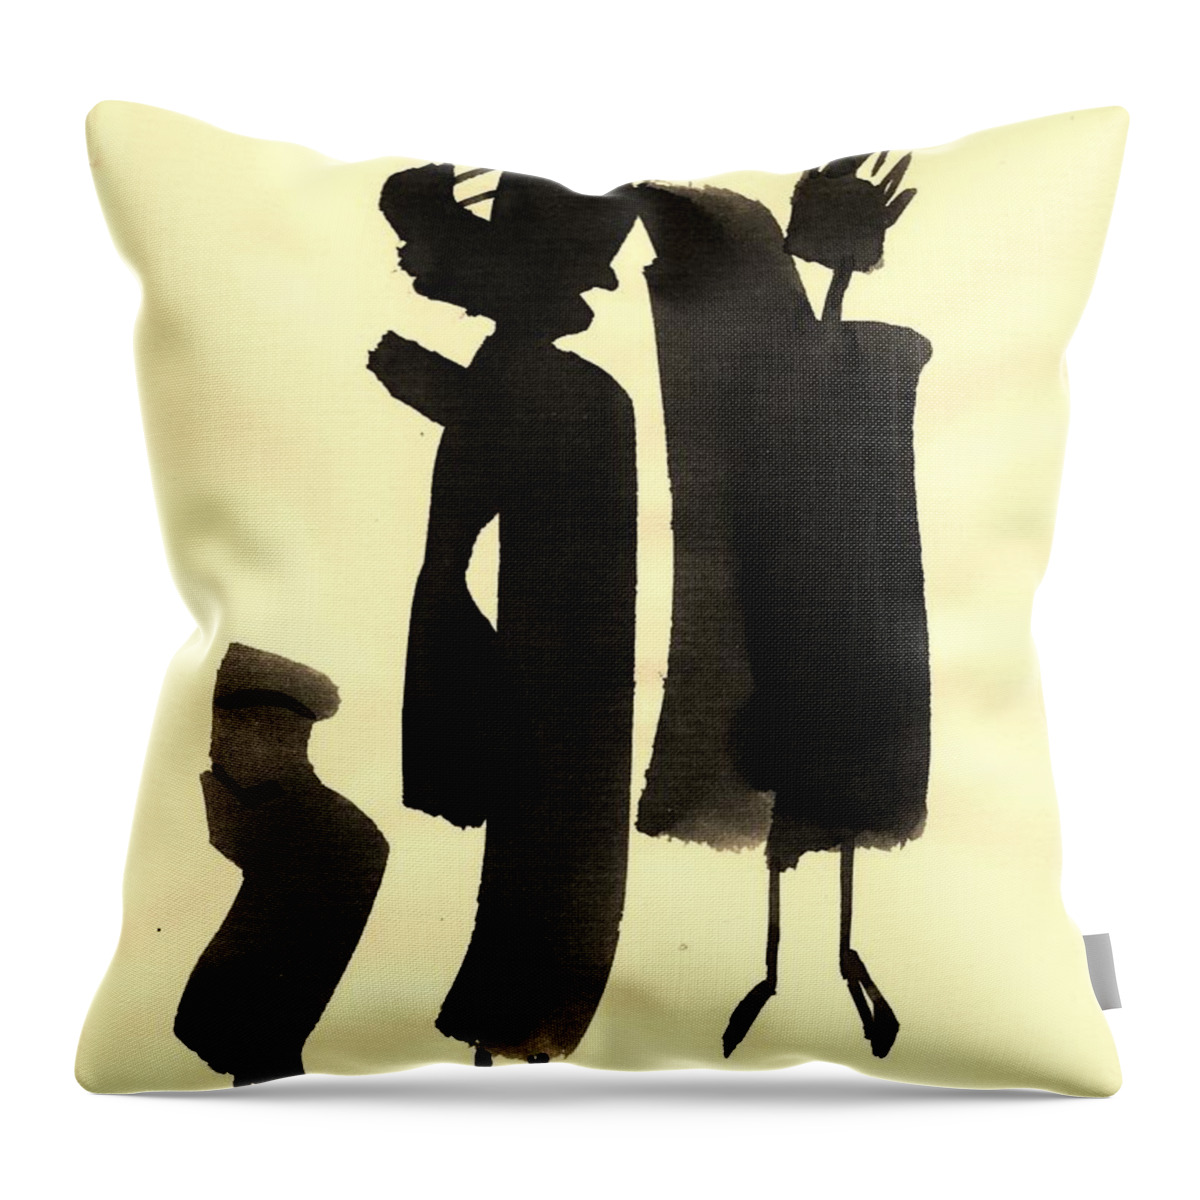 King Throw Pillow featuring the drawing 3 Figures by Karina Plachetka